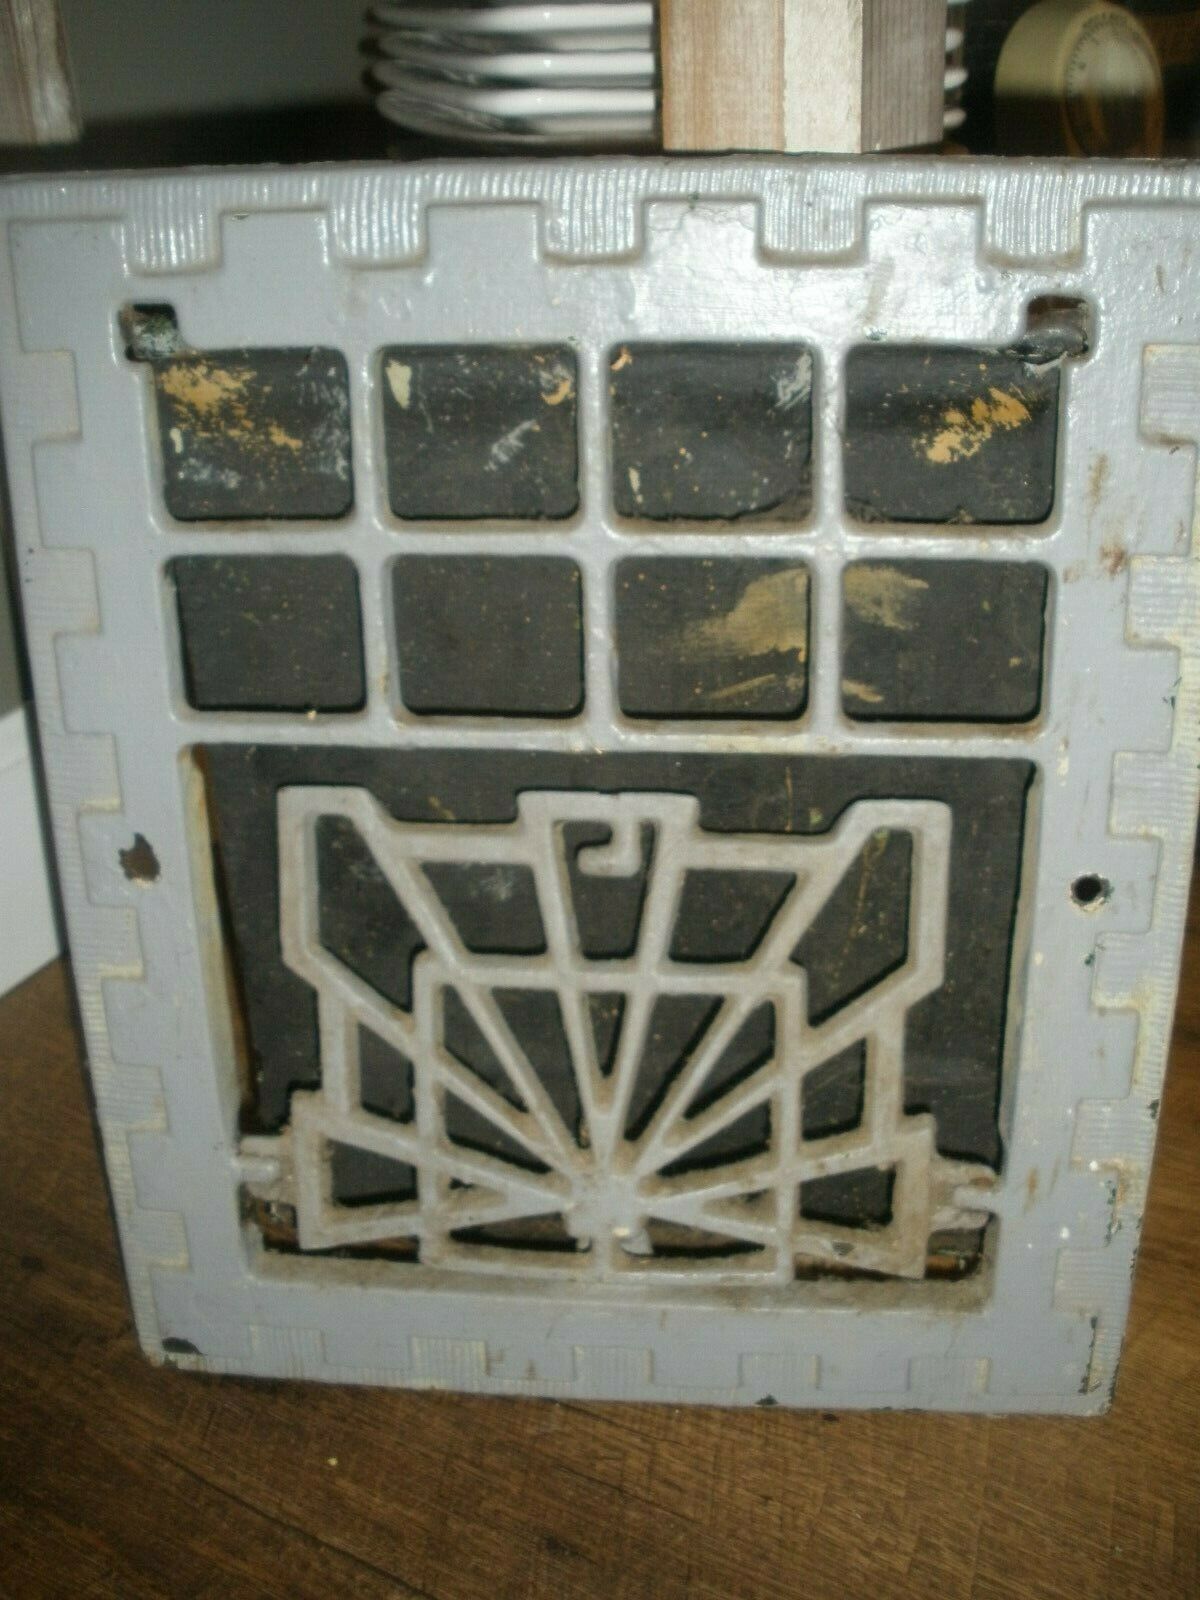 Vtg Cast Iron Heat Air Grate Wall Register 13x11" Wall Opening - Works! Art Deco